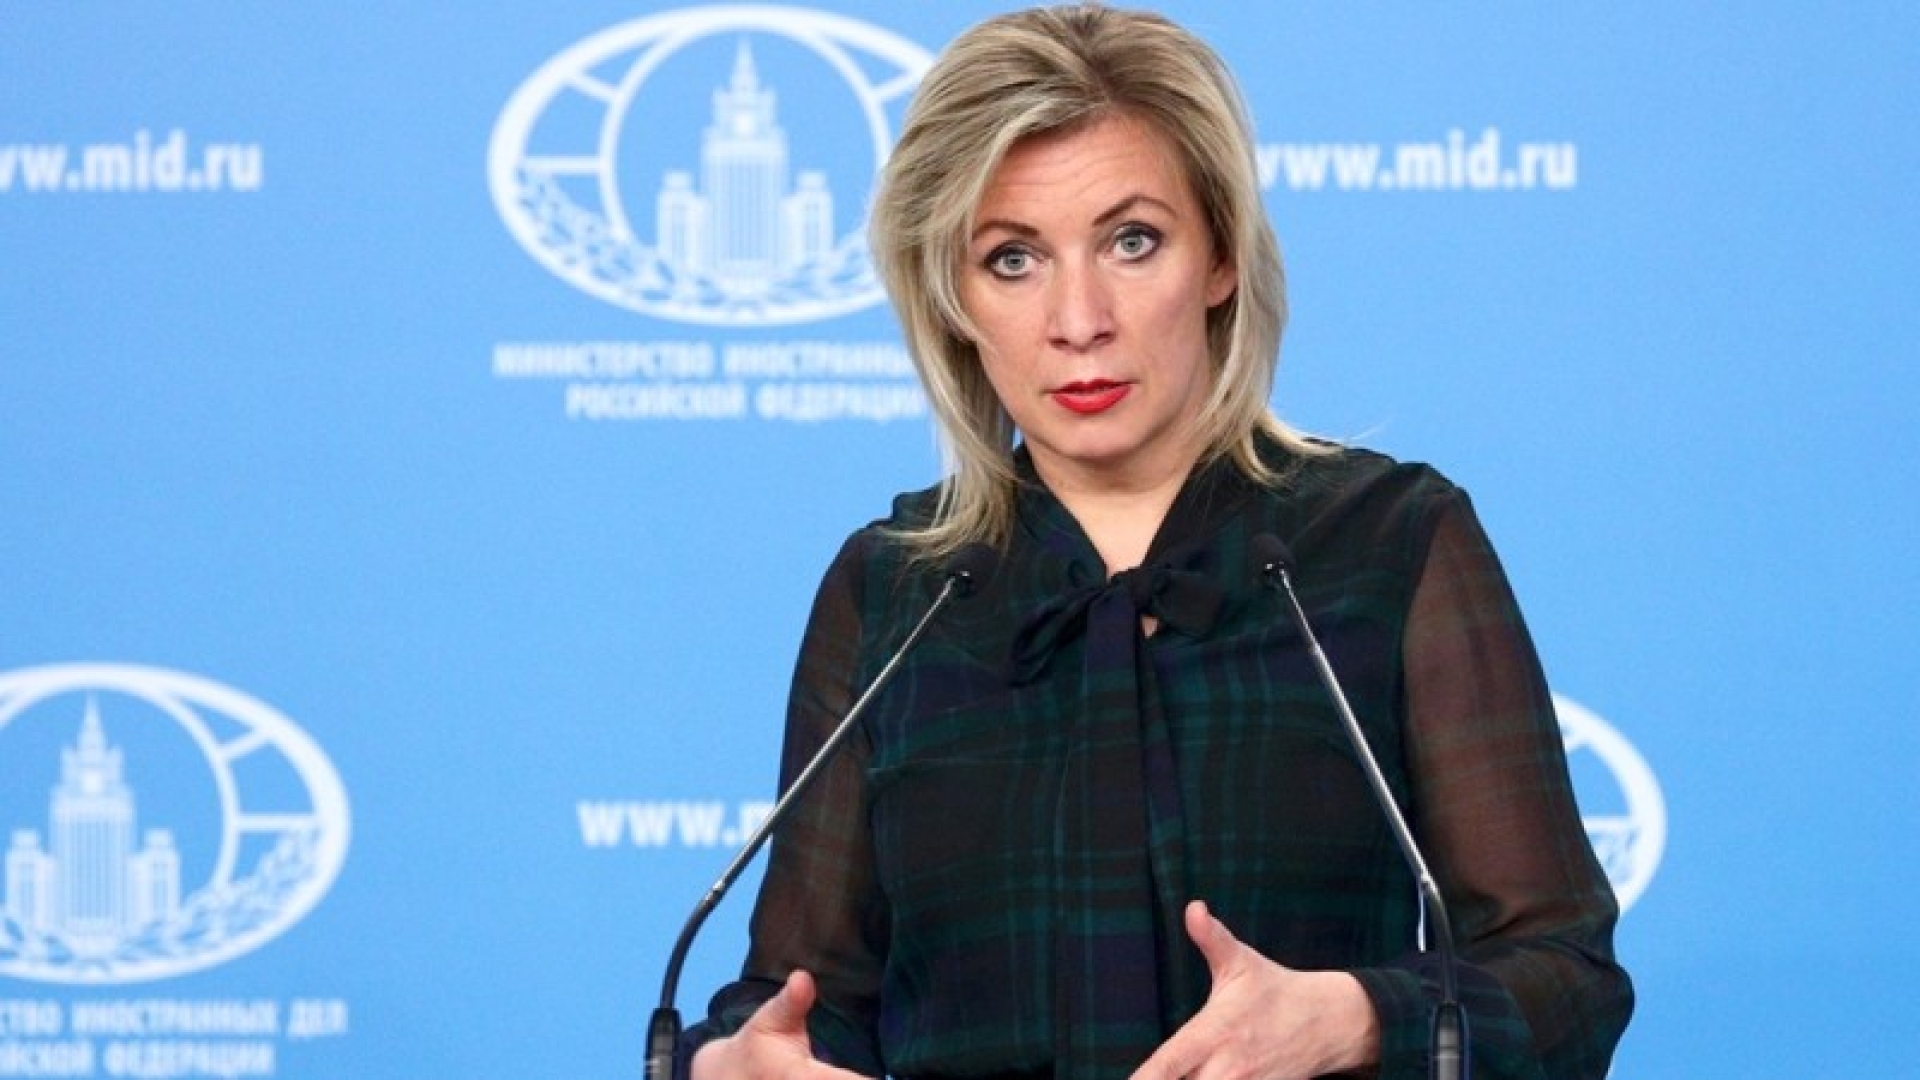 "It's more difficult to restore than destroy" - Maria Zakharova on negotiations with NATO and Iran